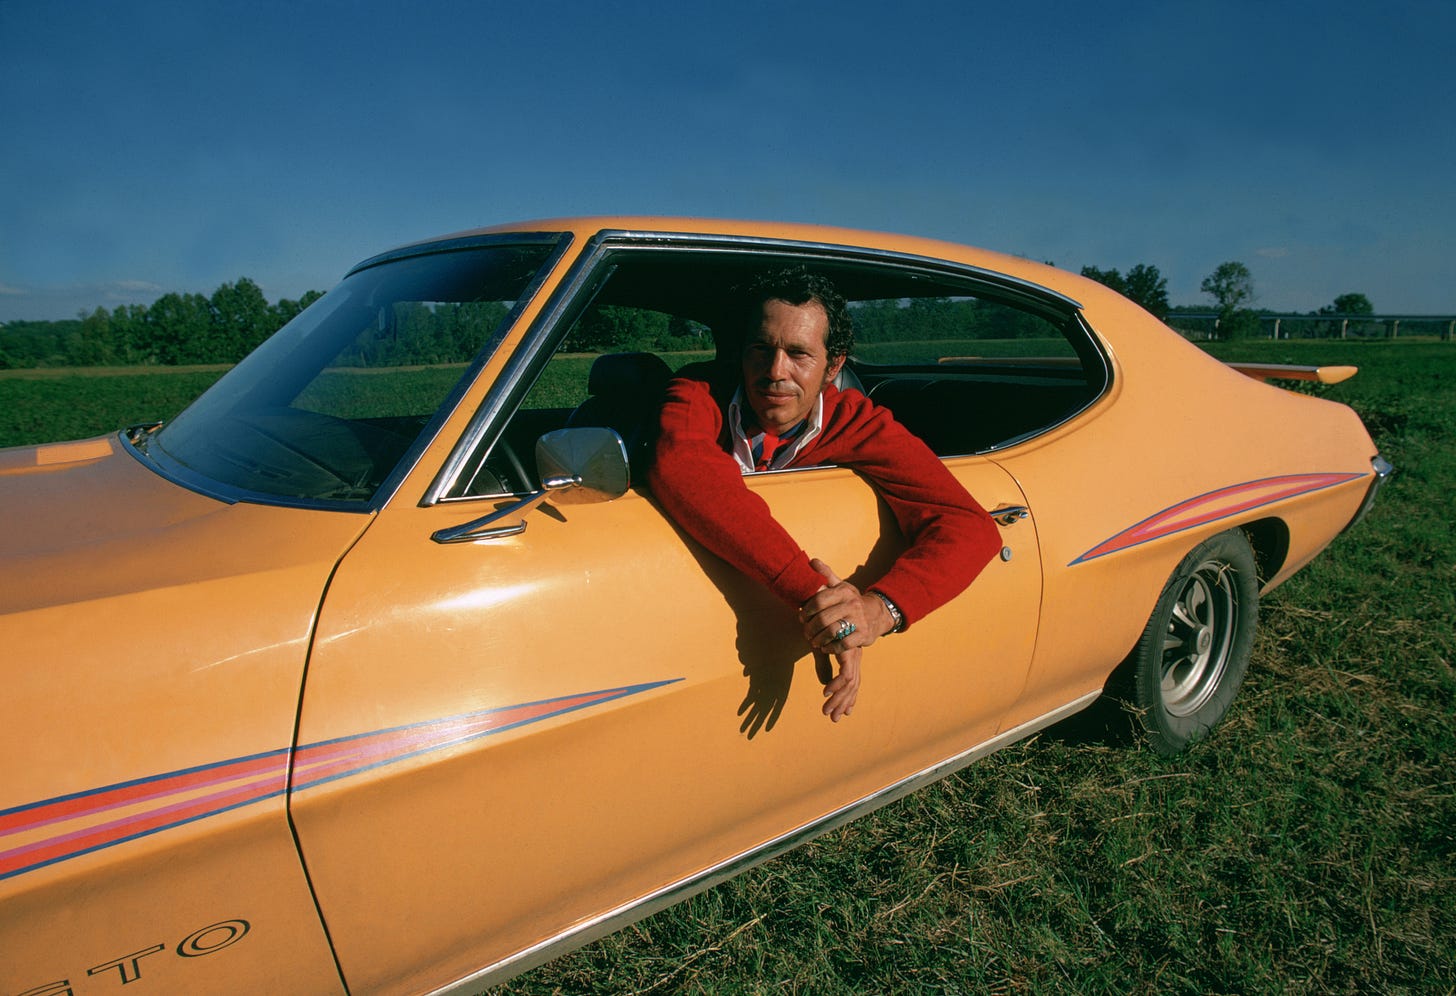 Photo of a man sitting in a GTO car parked in a grassy field.